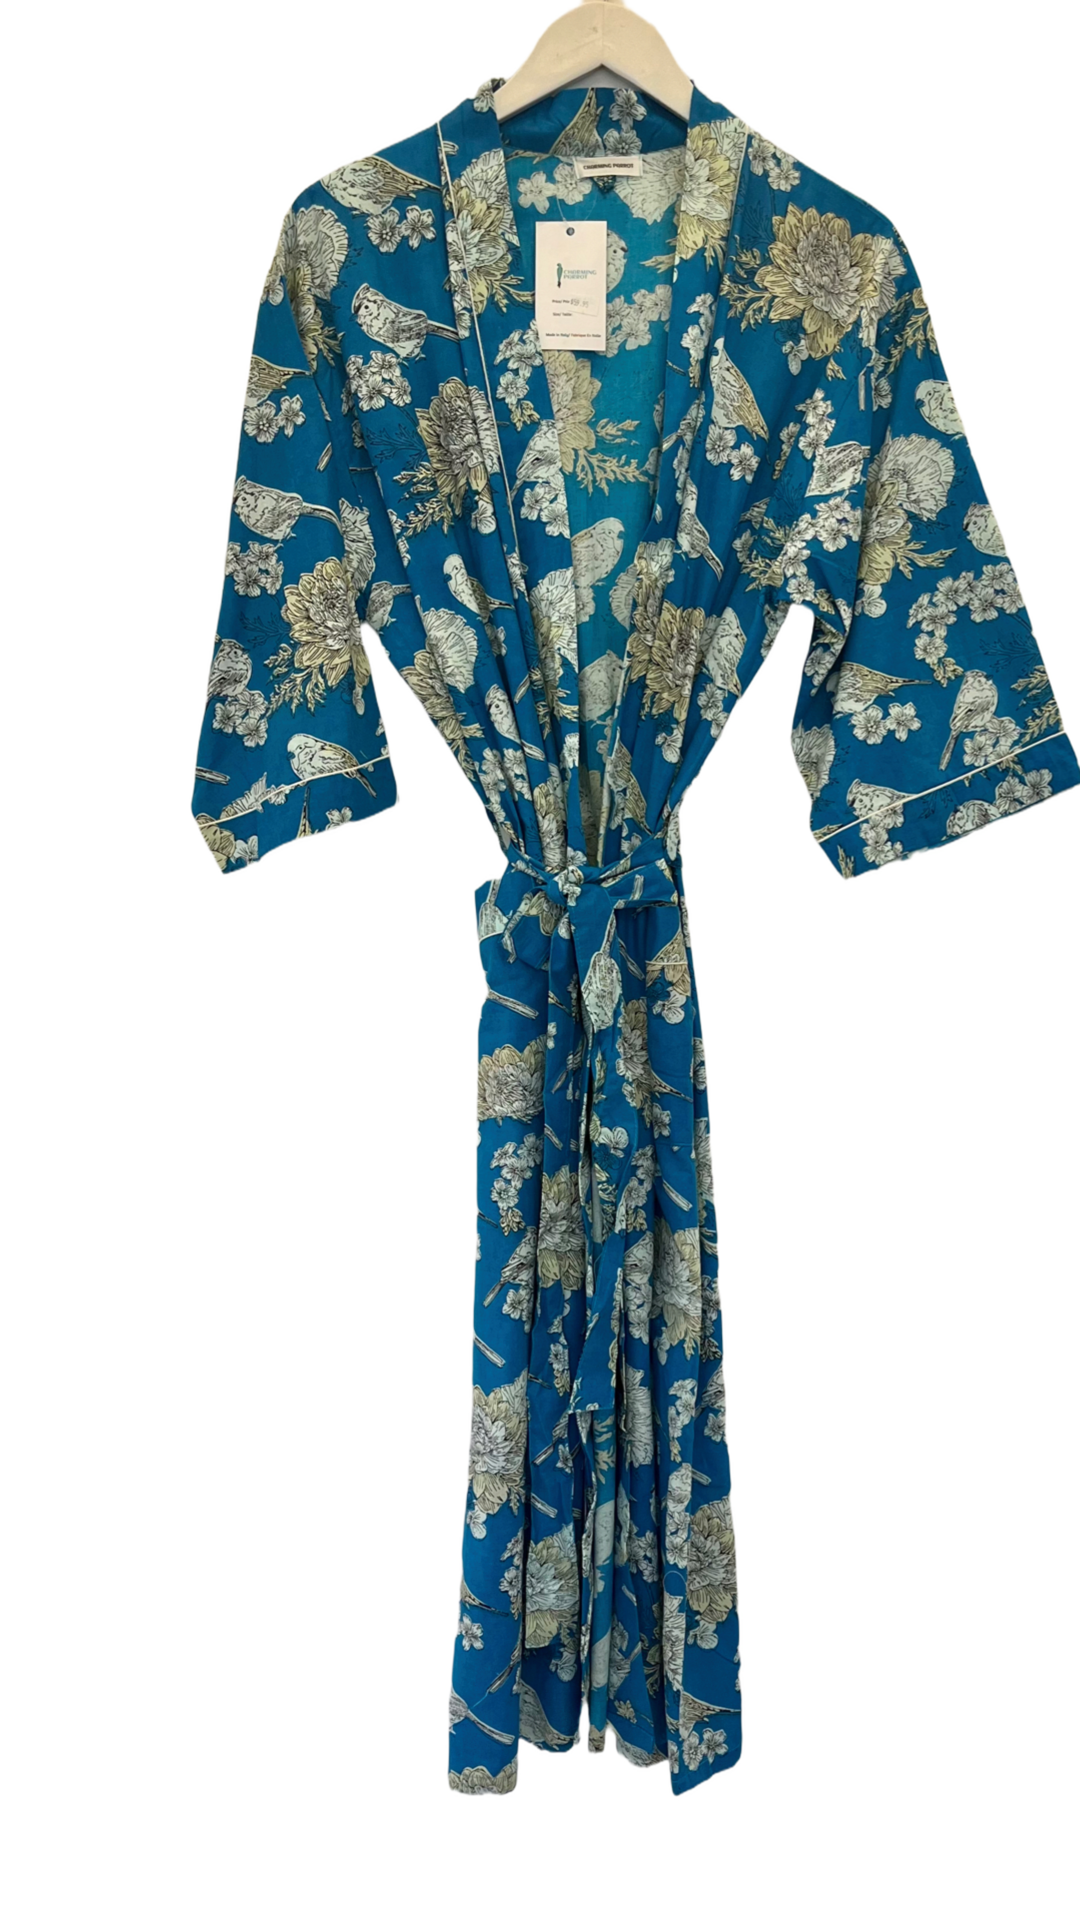 Lana 100% Cotton Robe with Pockets and Tie at waist